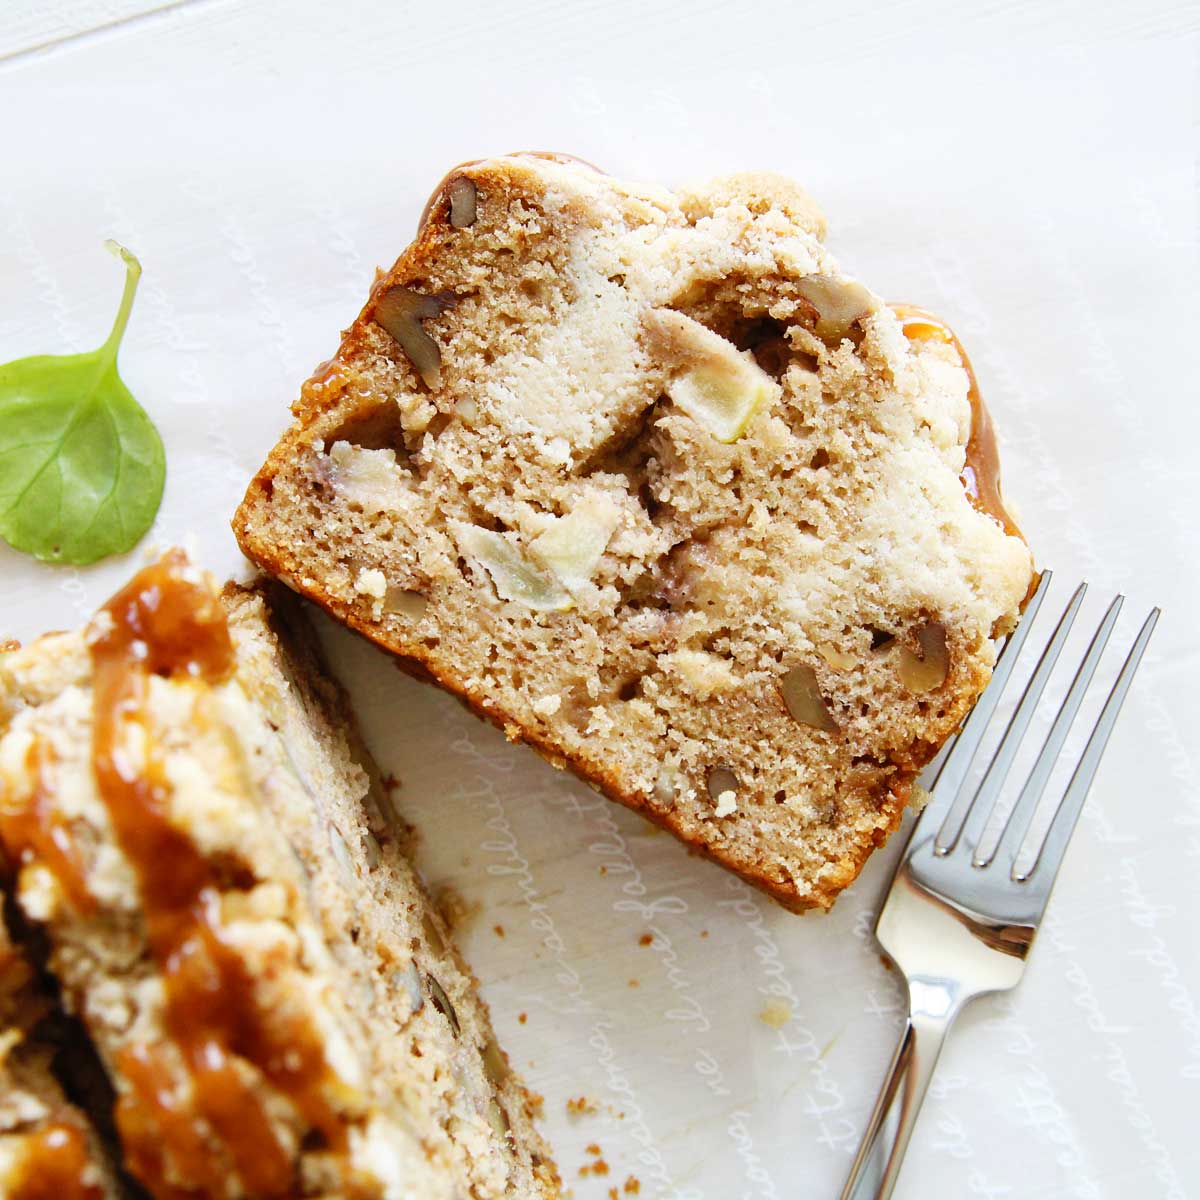 The Most Comforting Applesauce Banana Bread with Streusel Topping - swiss roll